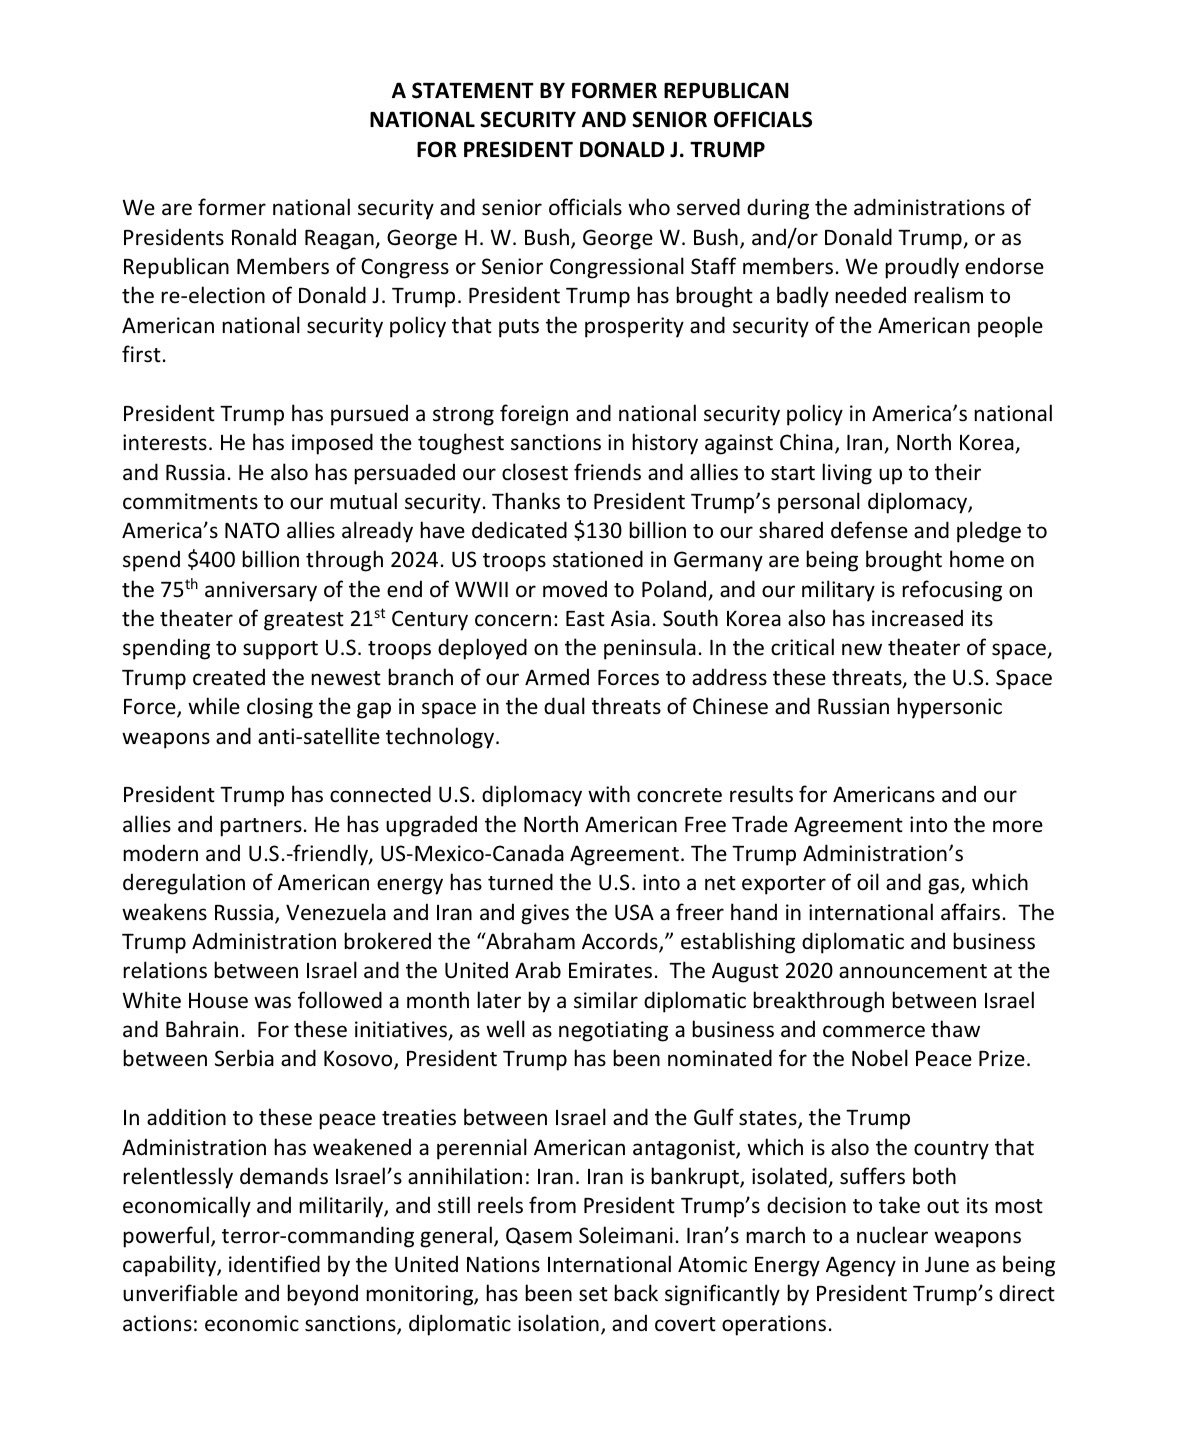 A Statement by Former Republican National Security and Senior Officials For President Donald J. Trump1